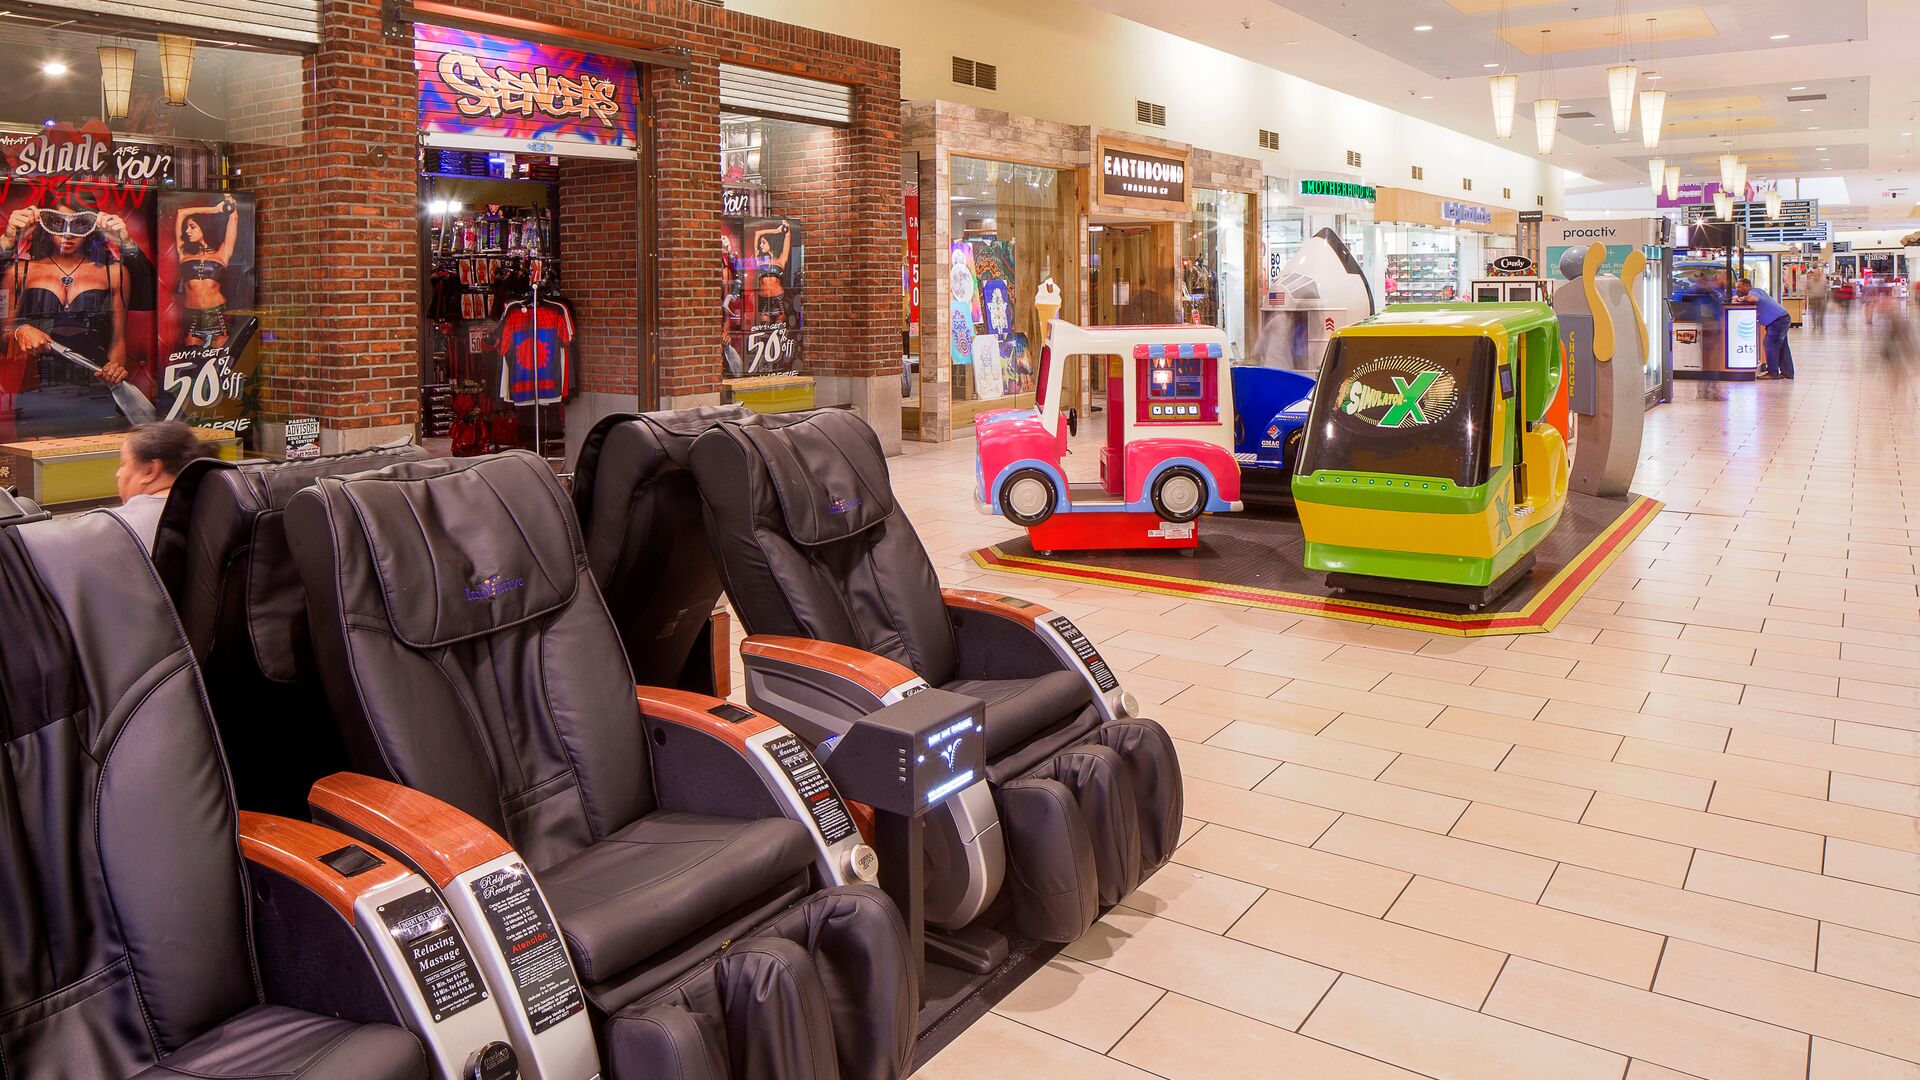 Interior hallway with massage chairs and children's play area